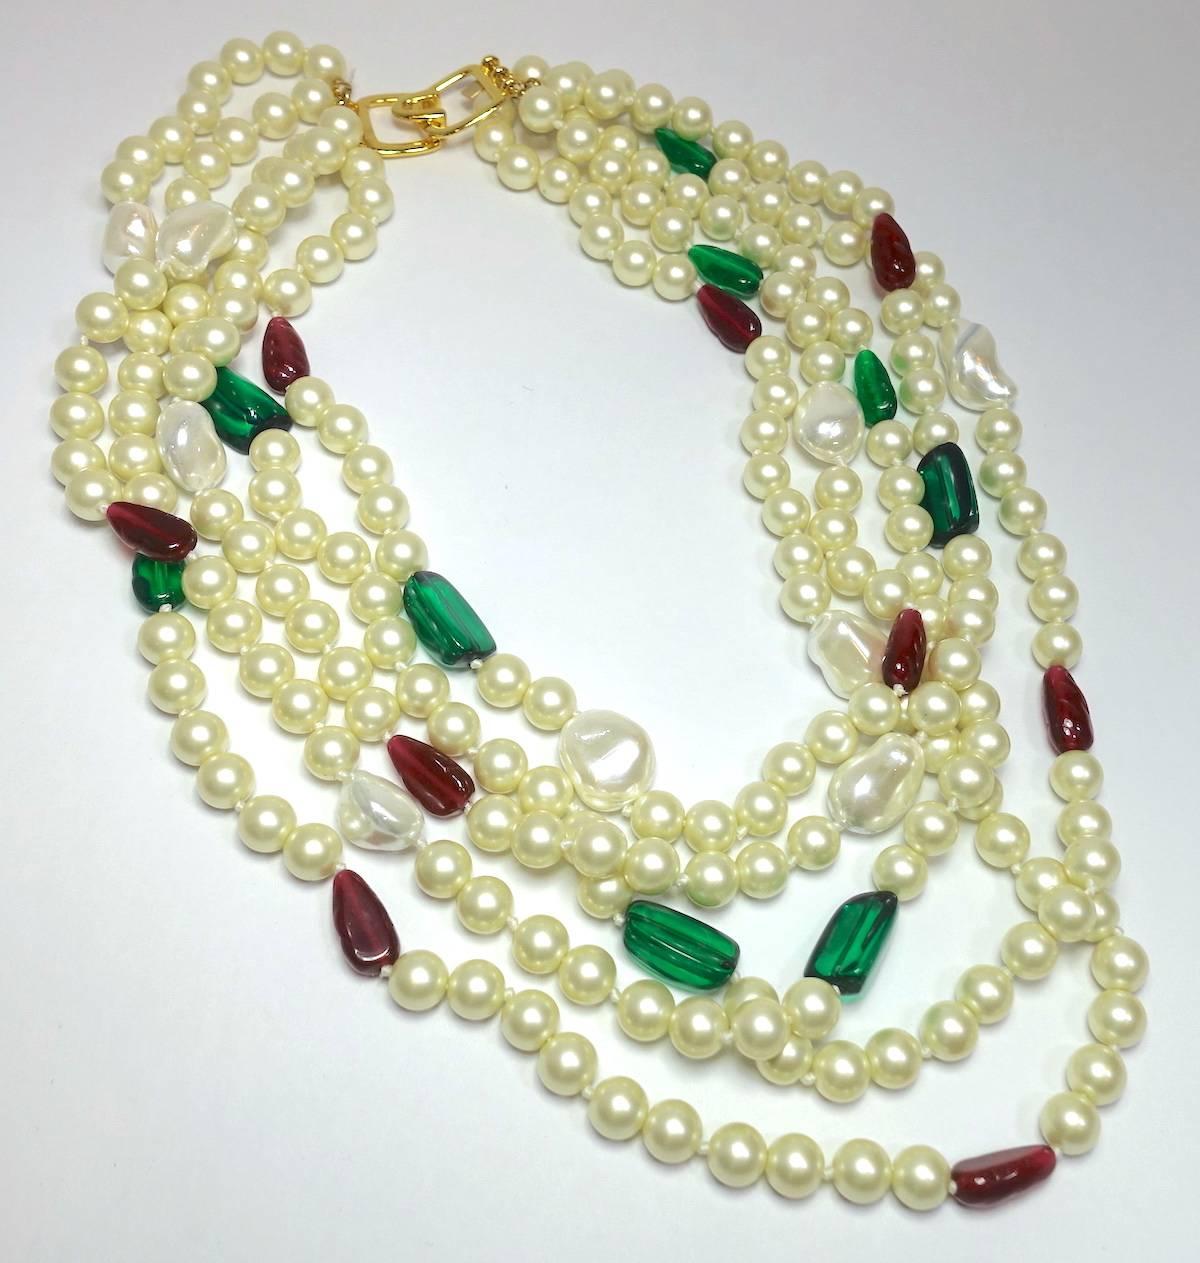 This signed Kenneth Lane necklace features 5 strands of faux pearls with green & red stone accents in a nickel-free gold-plated base metal setting.  The necklace measures 17-1/2” with each row graduating in length.  It has hook closure and the